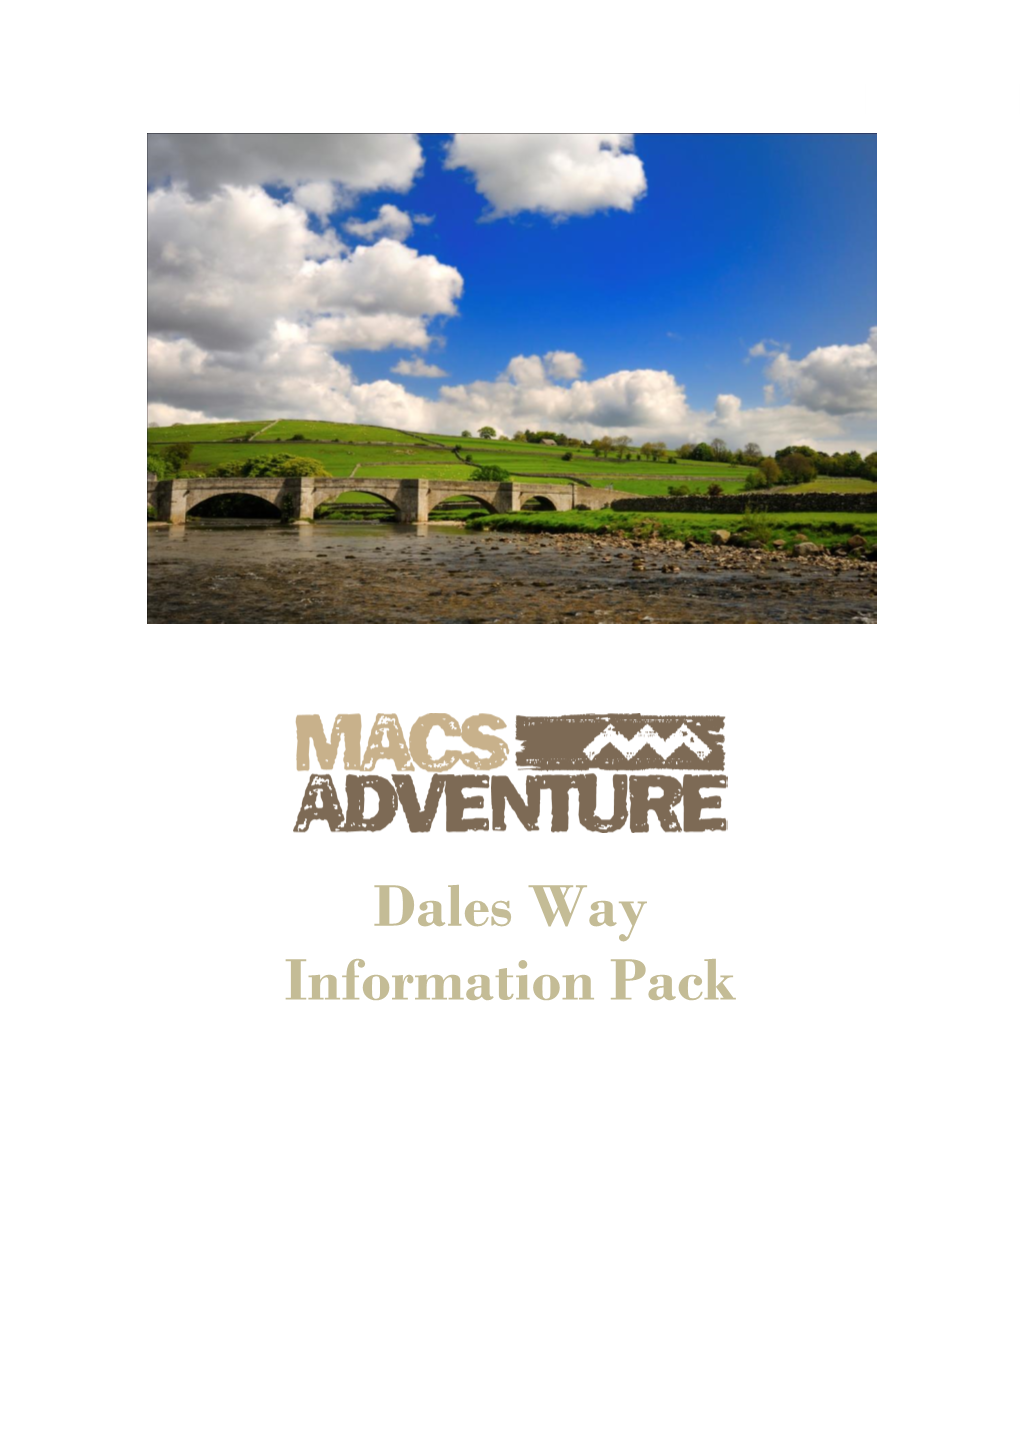 Dales Way Information Pack